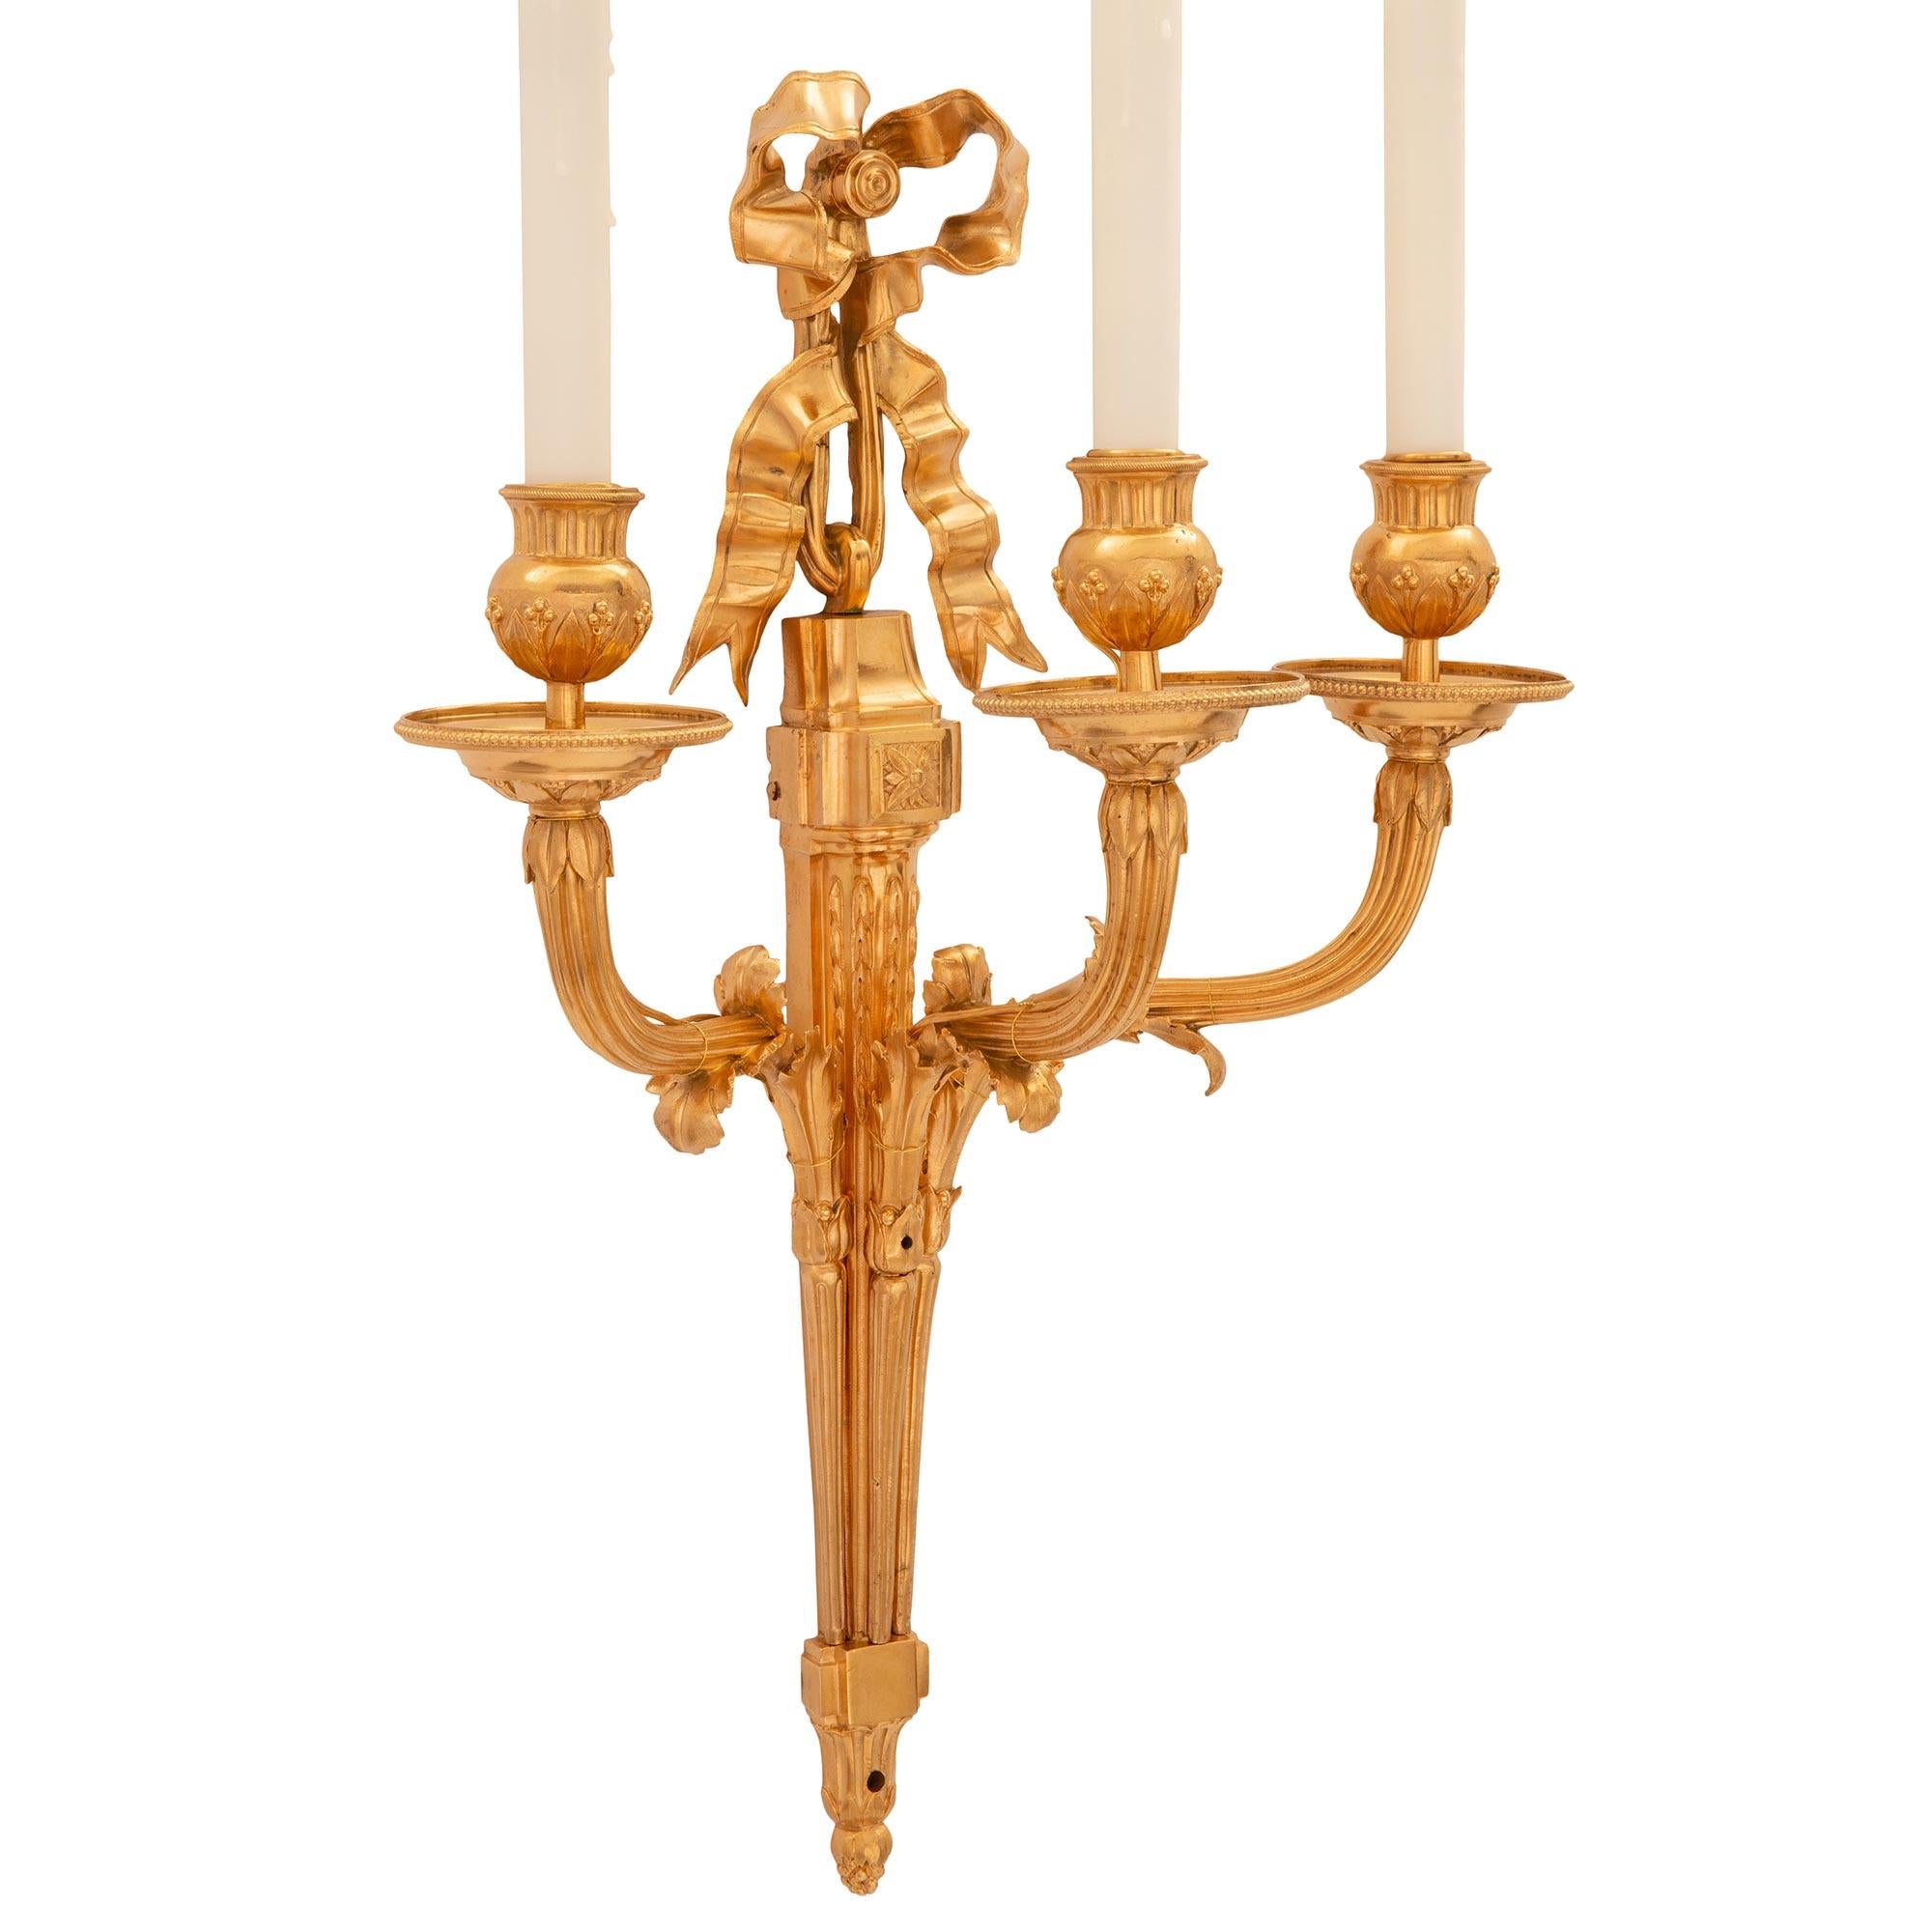 An extremely elegant pair of French 19th century Louis XVI st. ormolu sconces. Each three arm sconce is centered by a finely detailed bottom acorn finial below the elegant tapered fluted body and striking block rosette from where a charming and